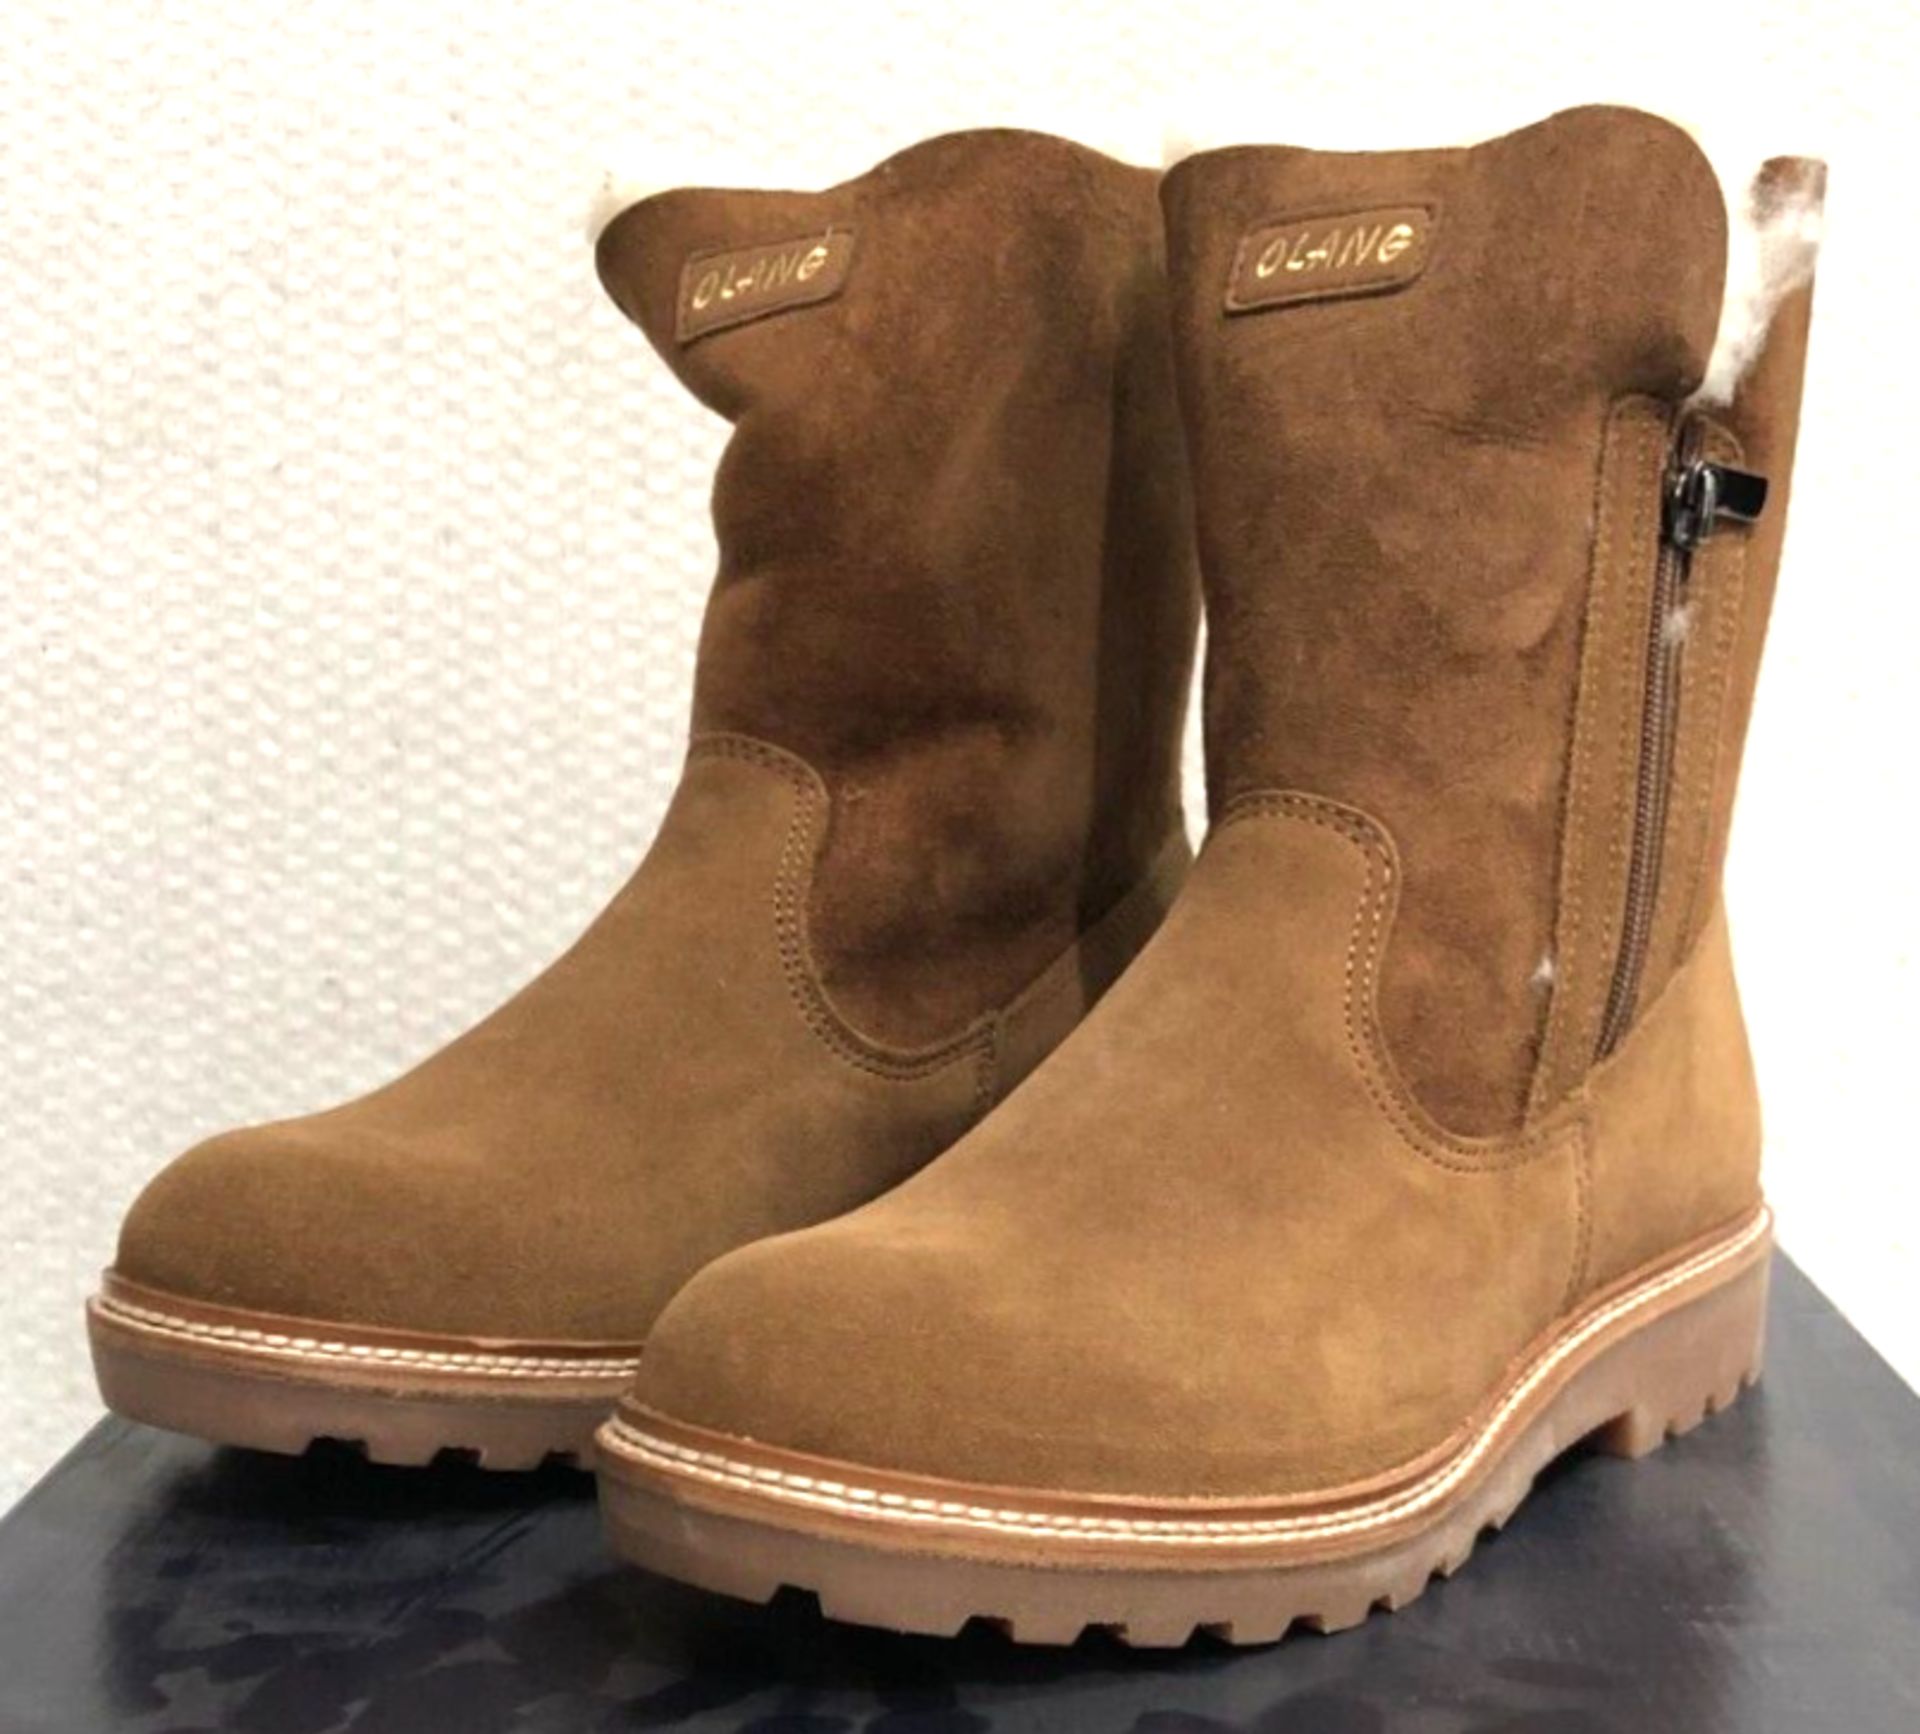 1 x Pair of Designer Olang Women's Winter Boots - Agata 85 Cuoio - Euro Size 37 - New Boxed - Image 2 of 4